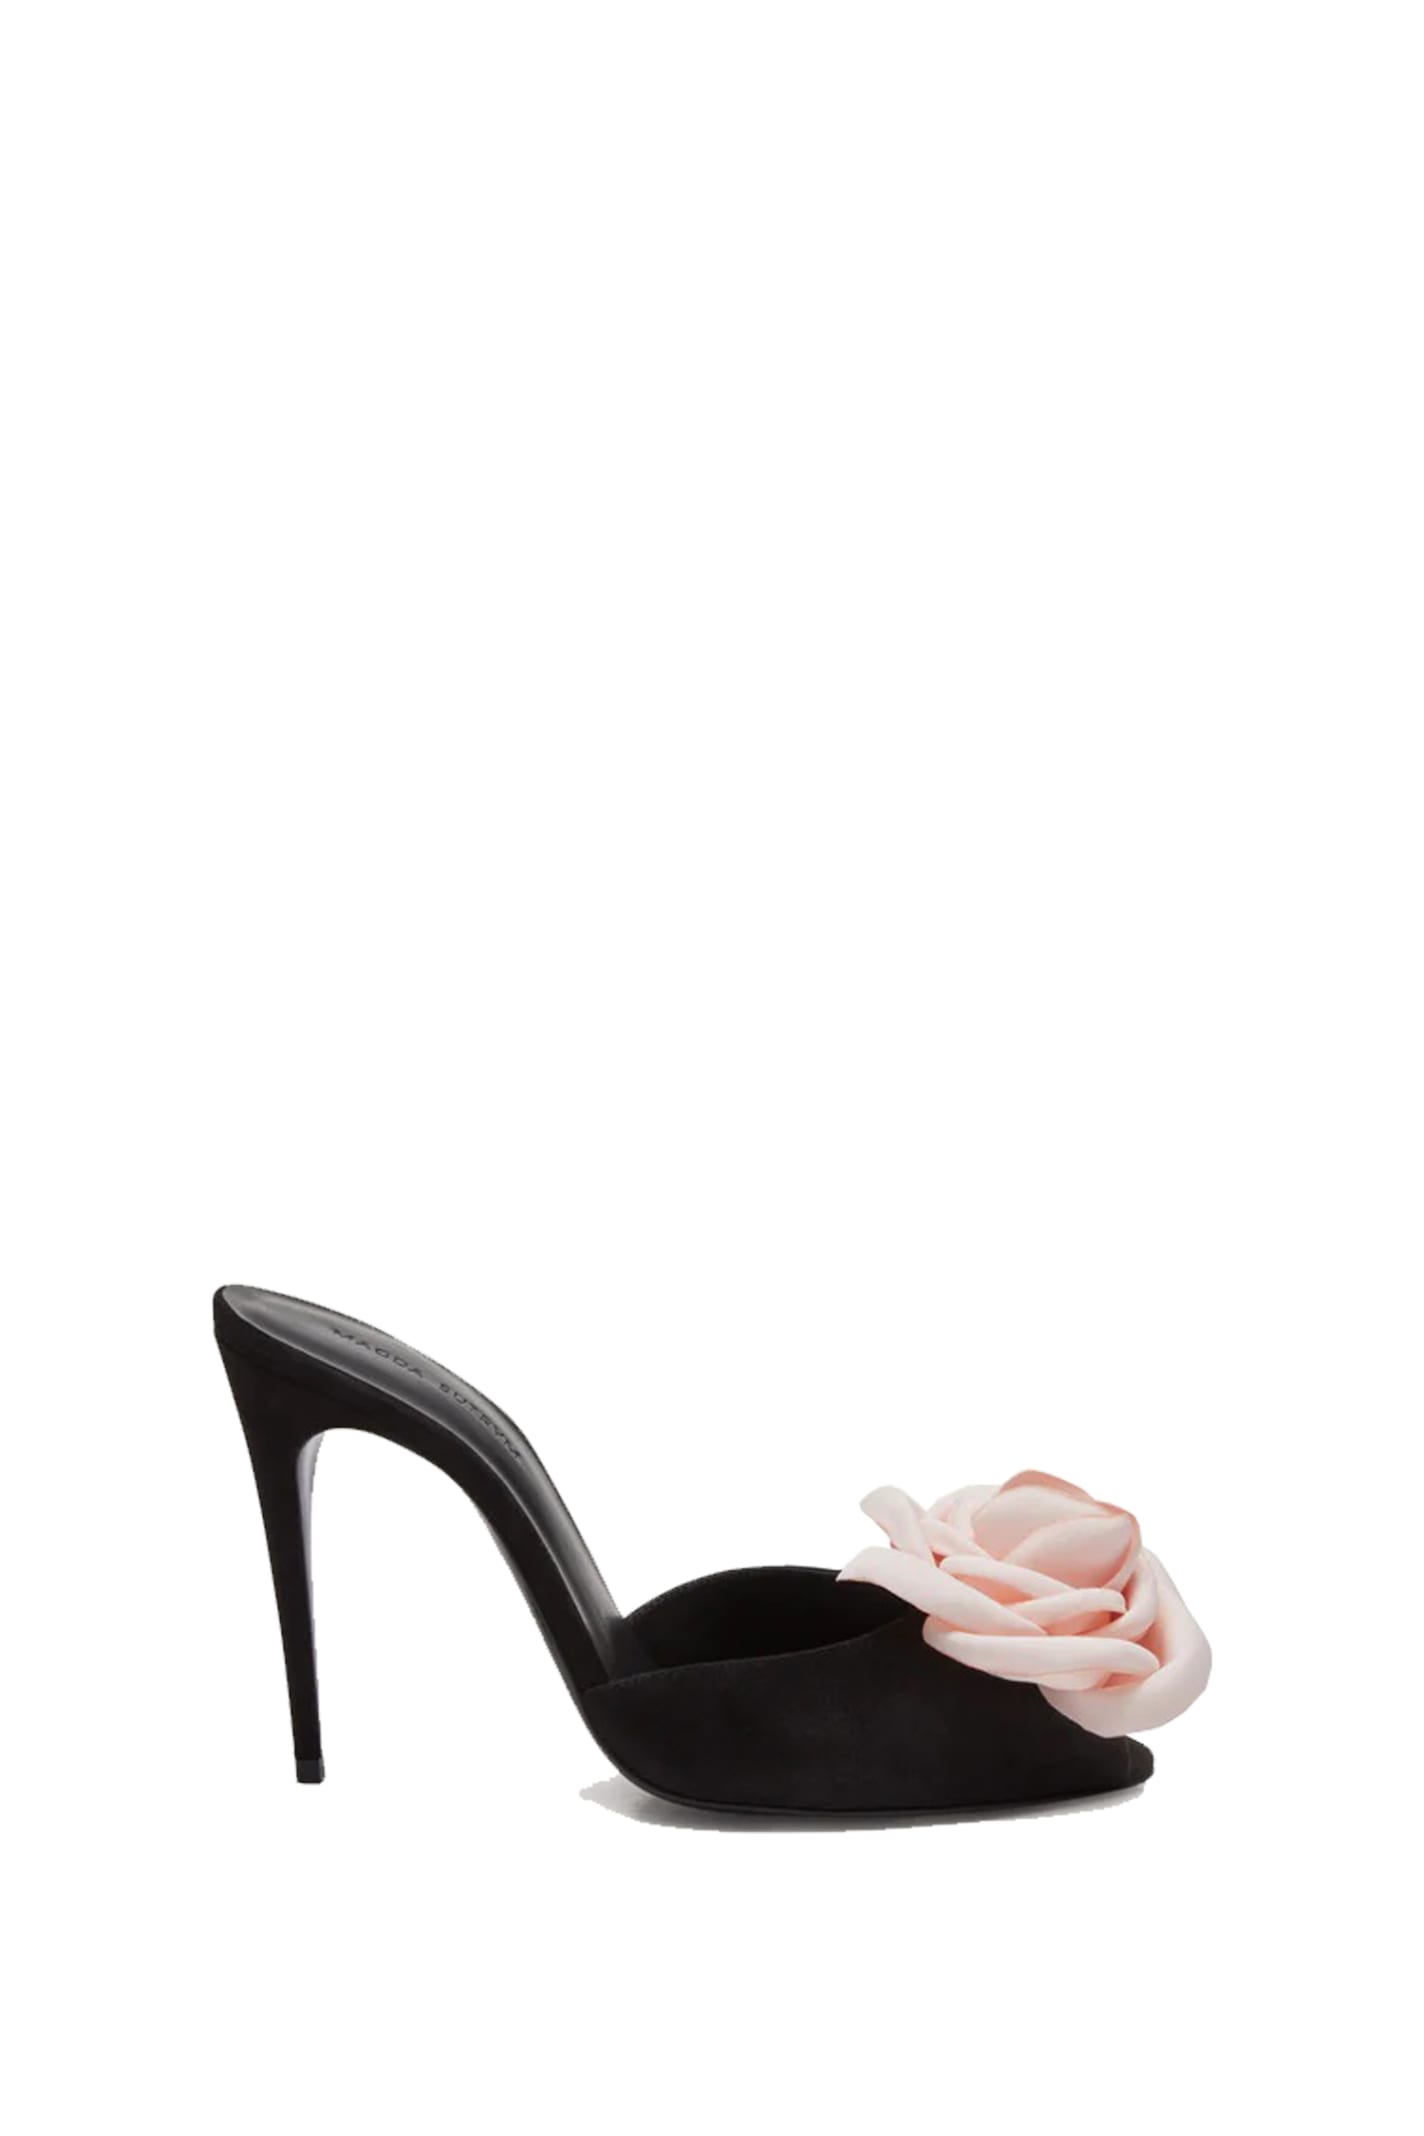 Shop Magda Butrym Shoes With Heels In Black